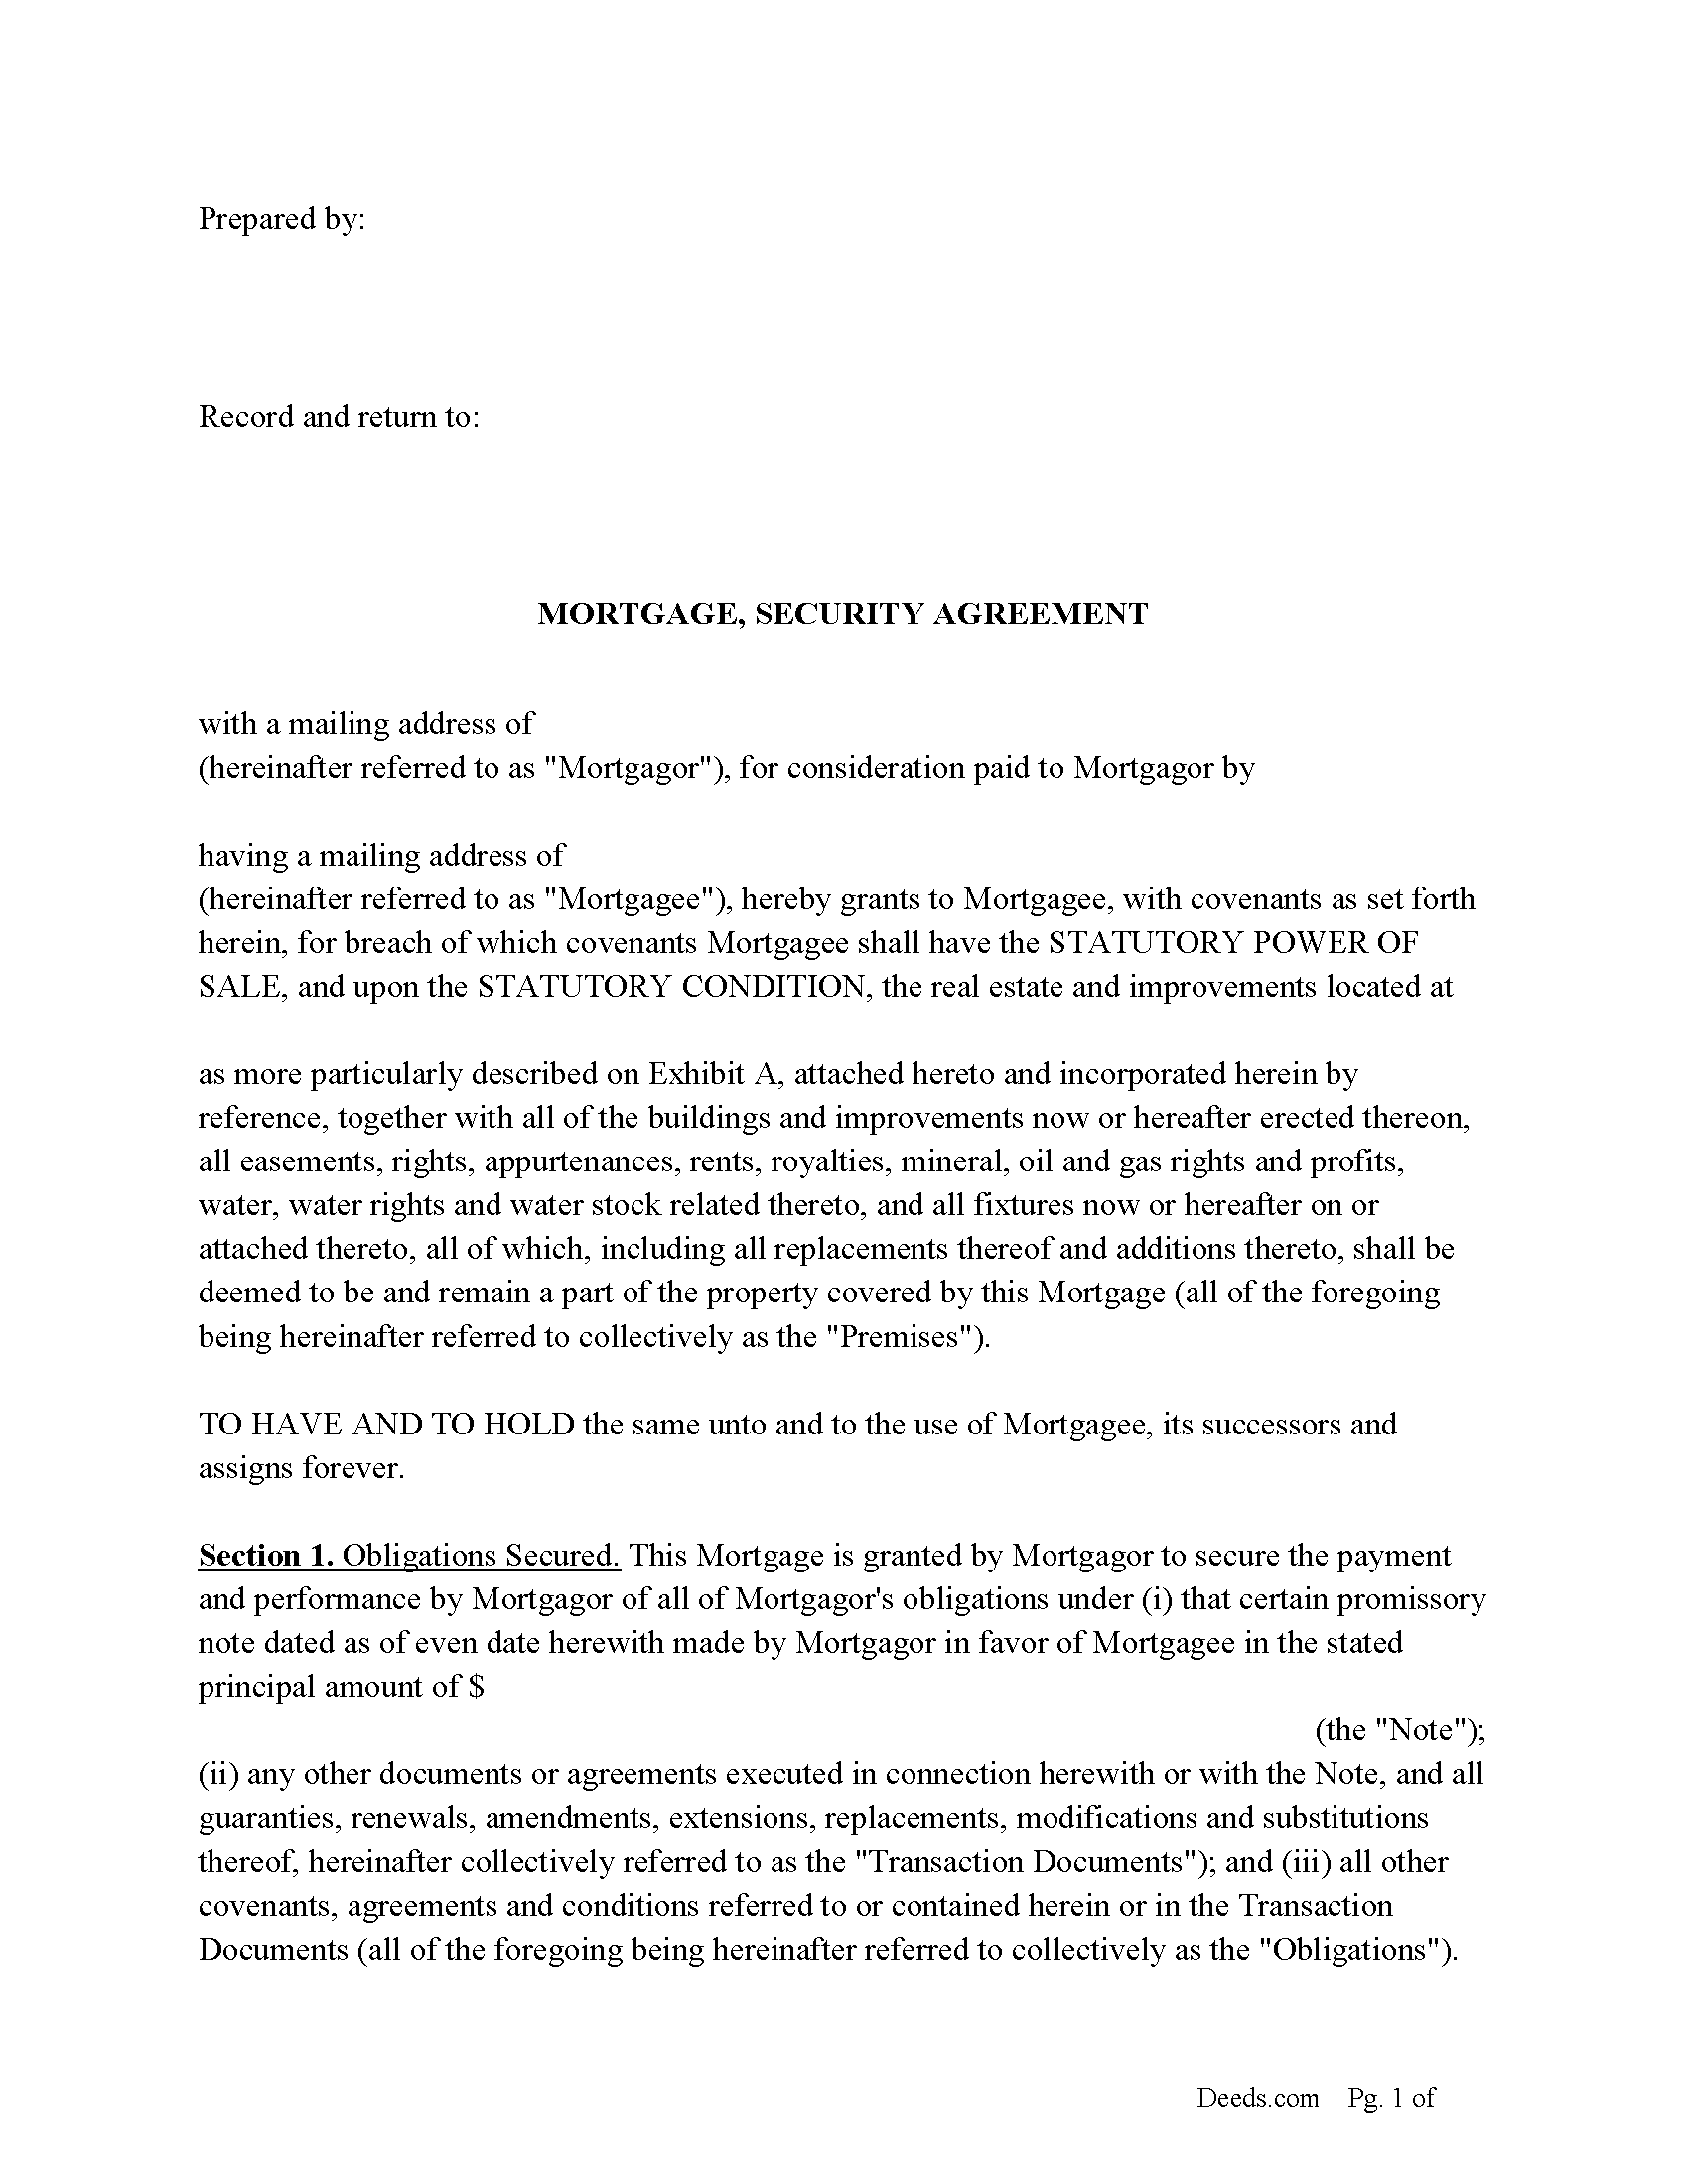 Rhode Island Mortgage Security Agreement and Promissory Note Image